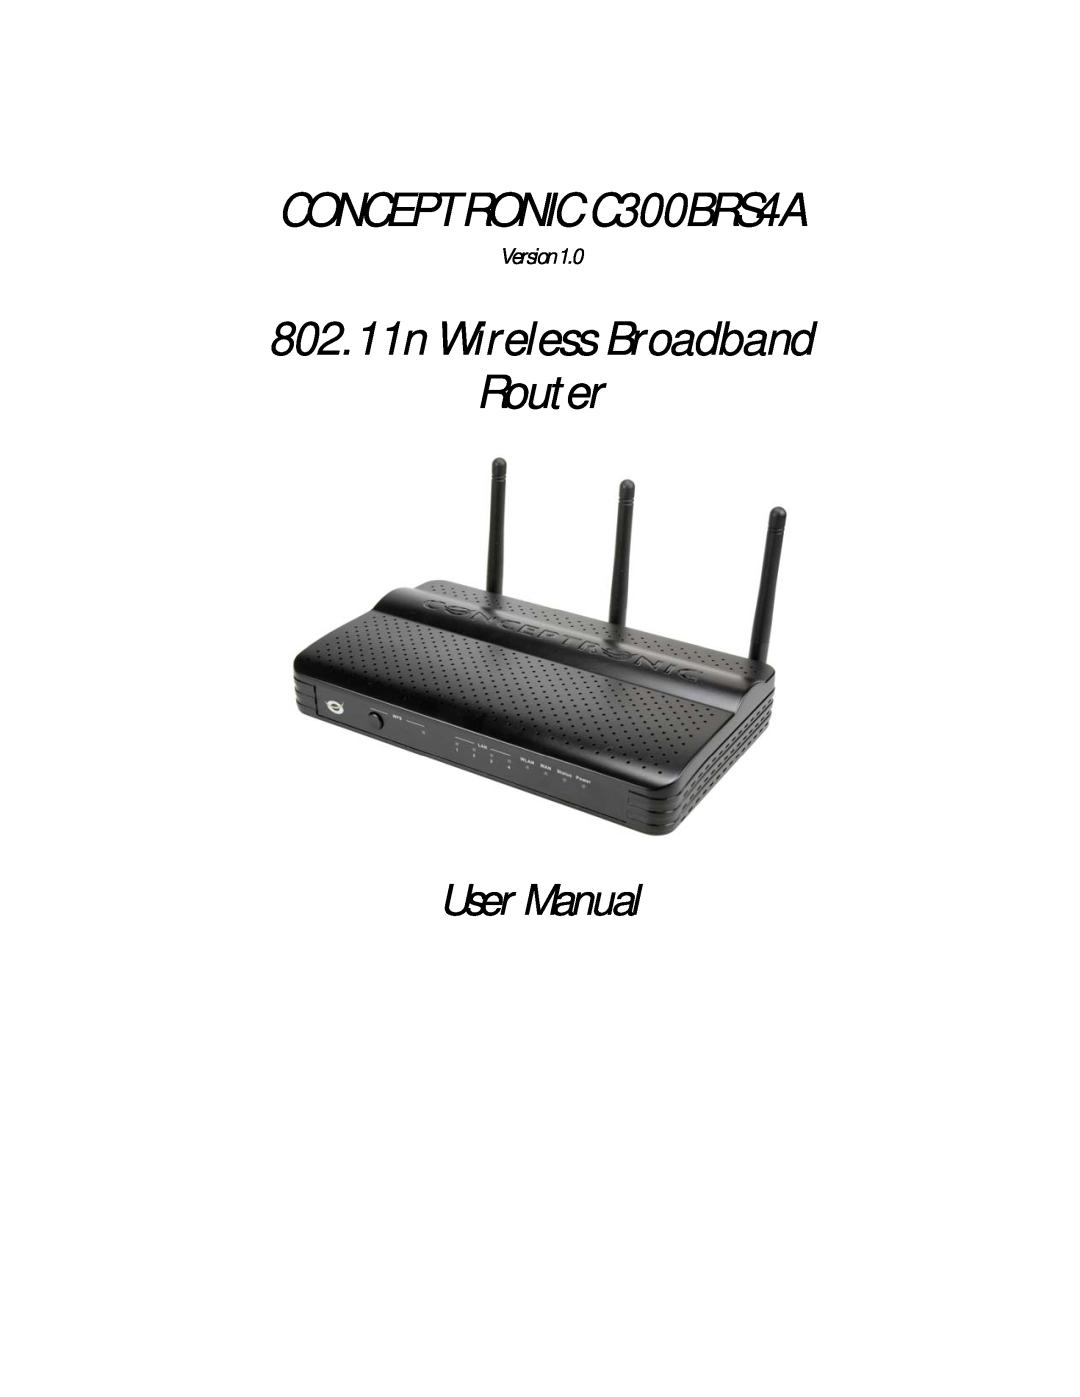 Conceptronic user manual CONCEPTRONIC C300BRS4A, 802.11n Wireless Broadband Router, User Manual, Version1.0 